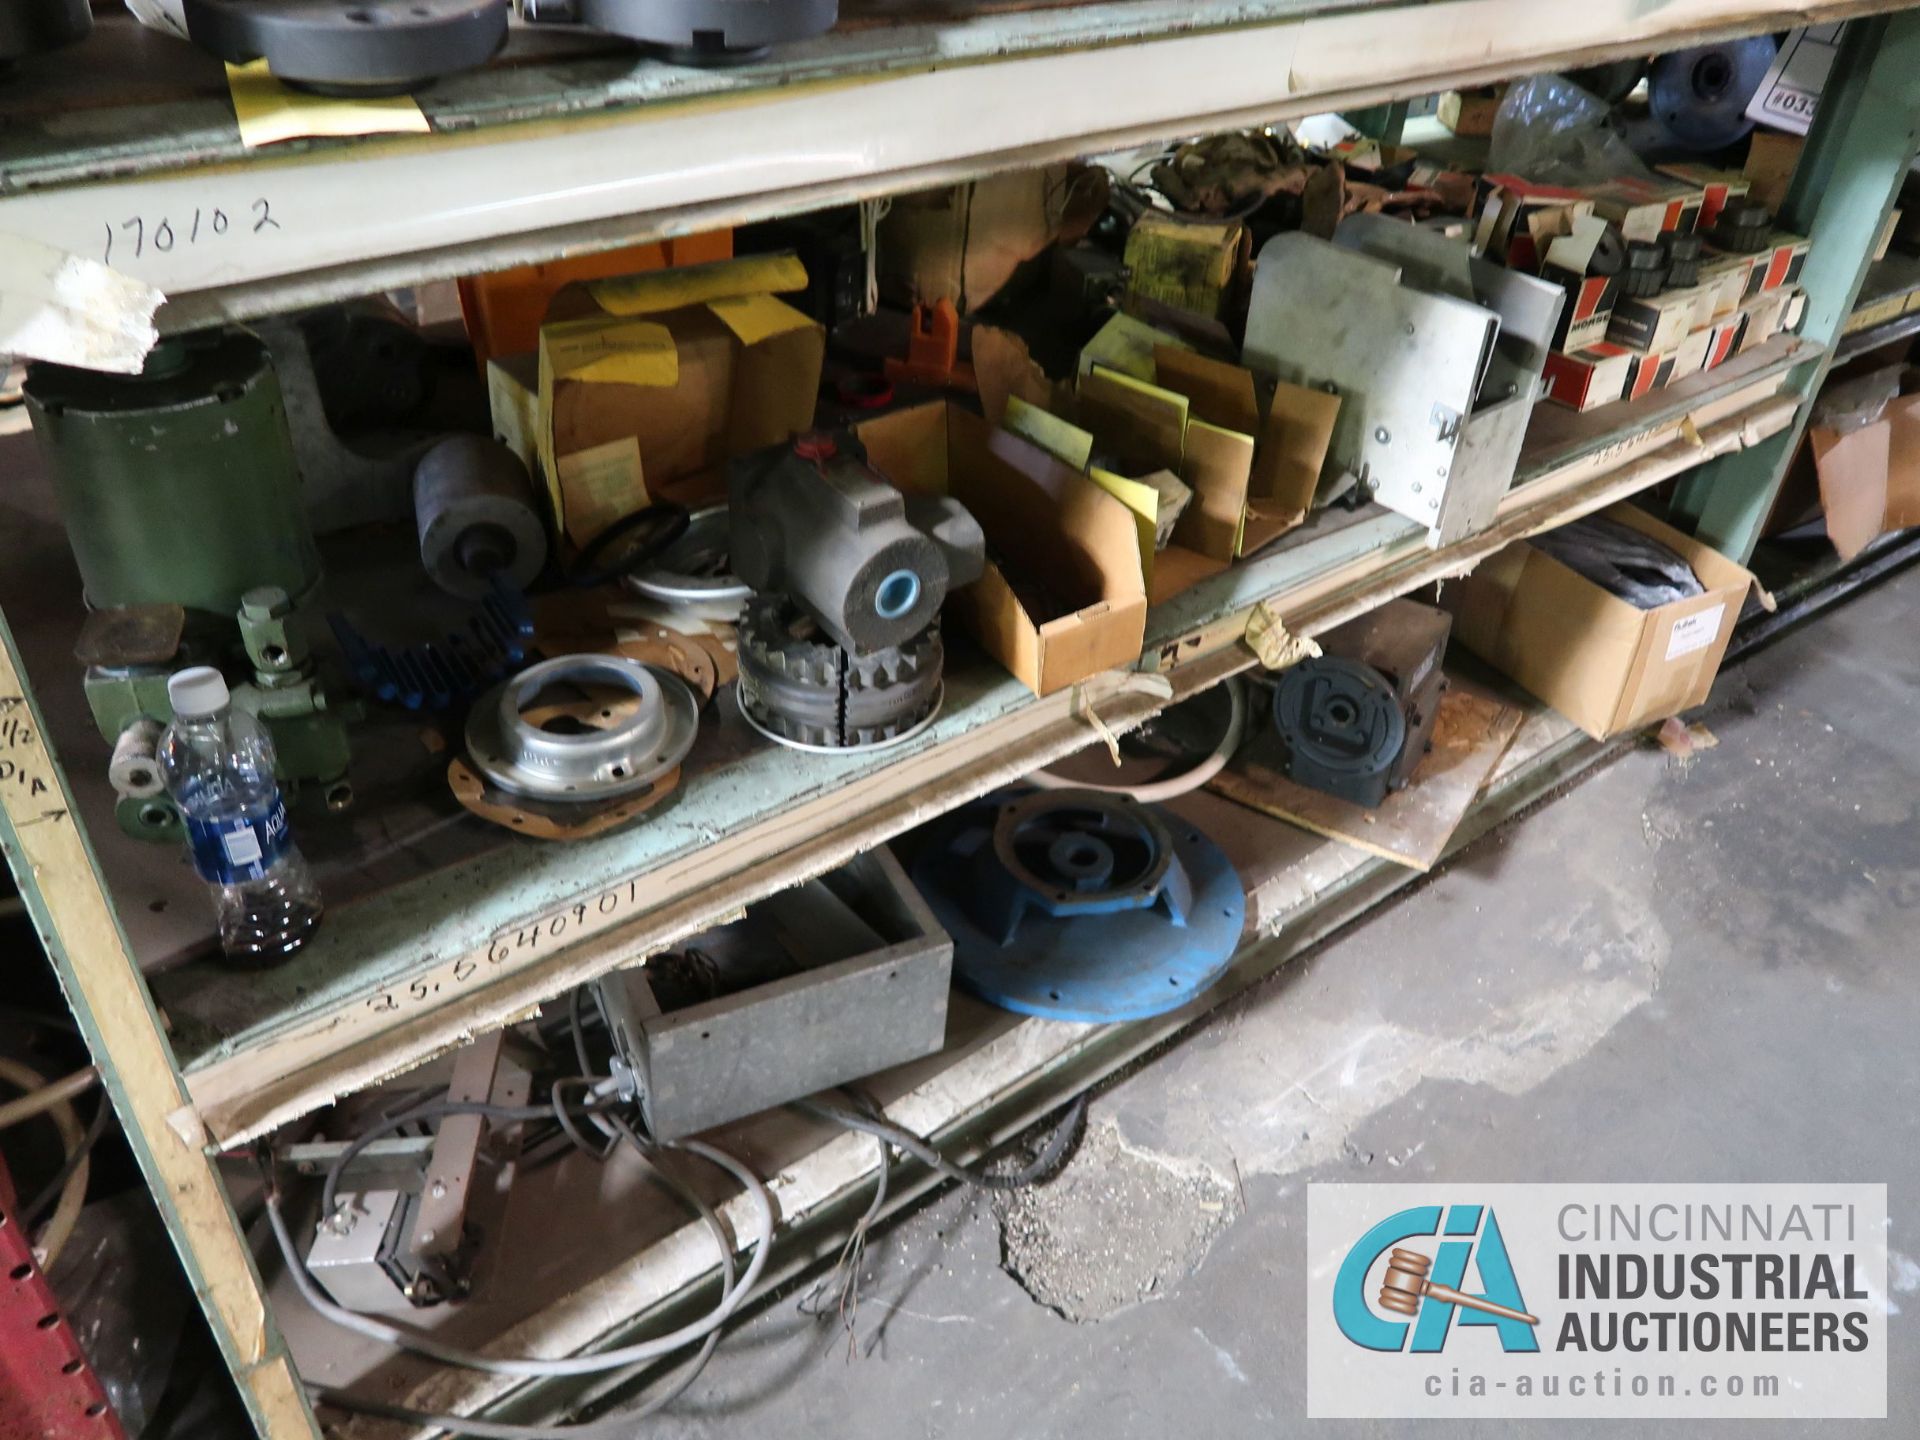 (LOT) MACHINE PARTS, COMPRESSORS, REDUCERS, GEARS, MOTORS, AND OTHER (4) SECTIONS RACK - Image 21 of 28